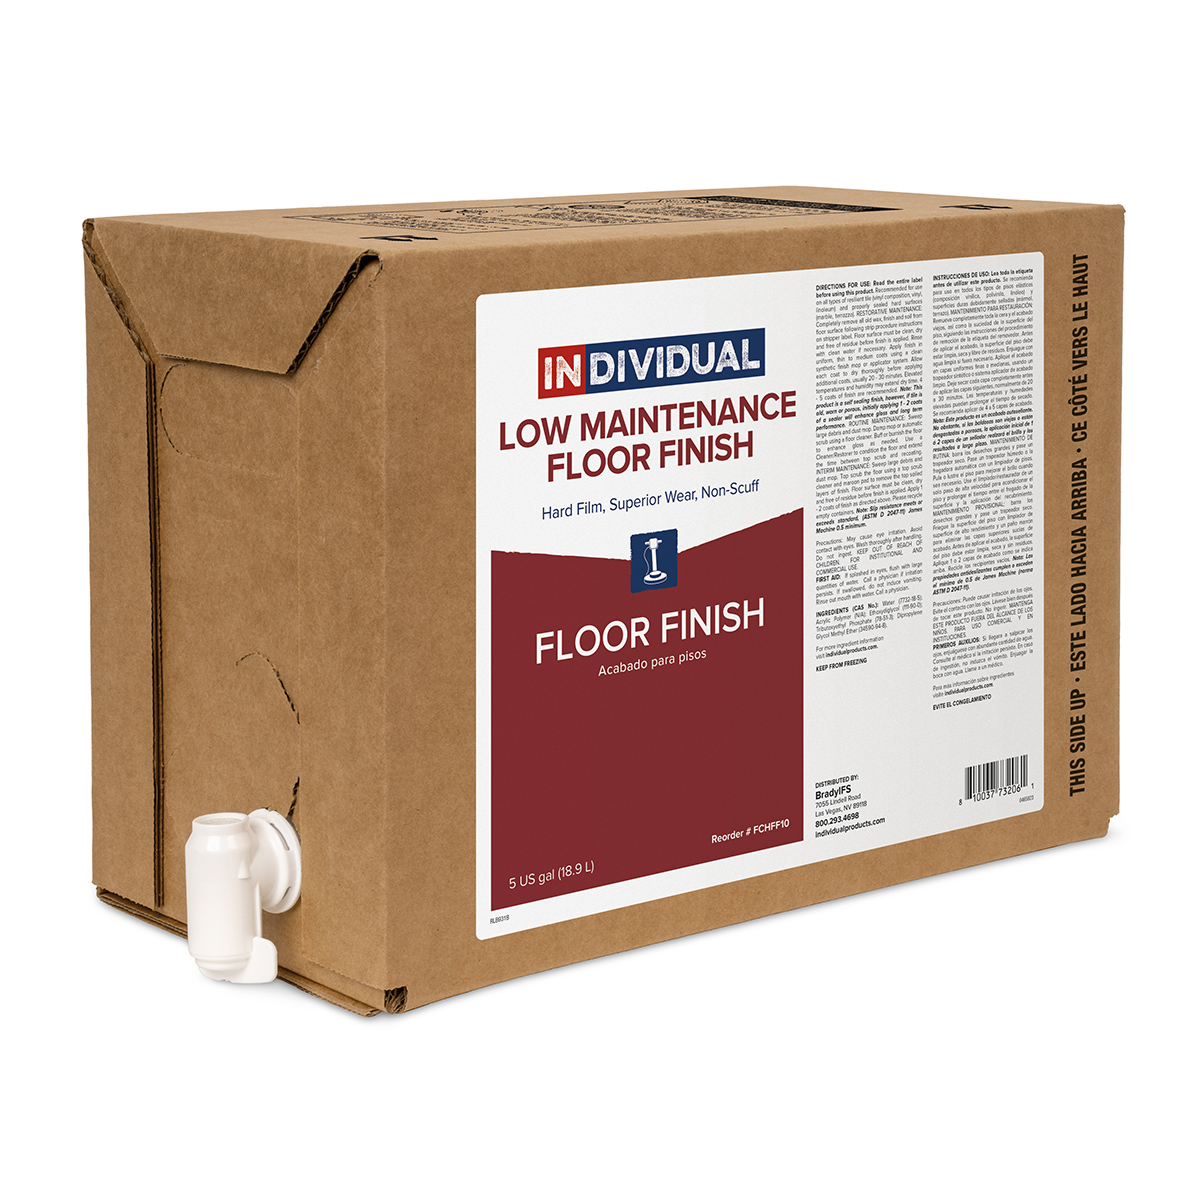 Fchff Product Image Individual Low Maintenance Floor Finish